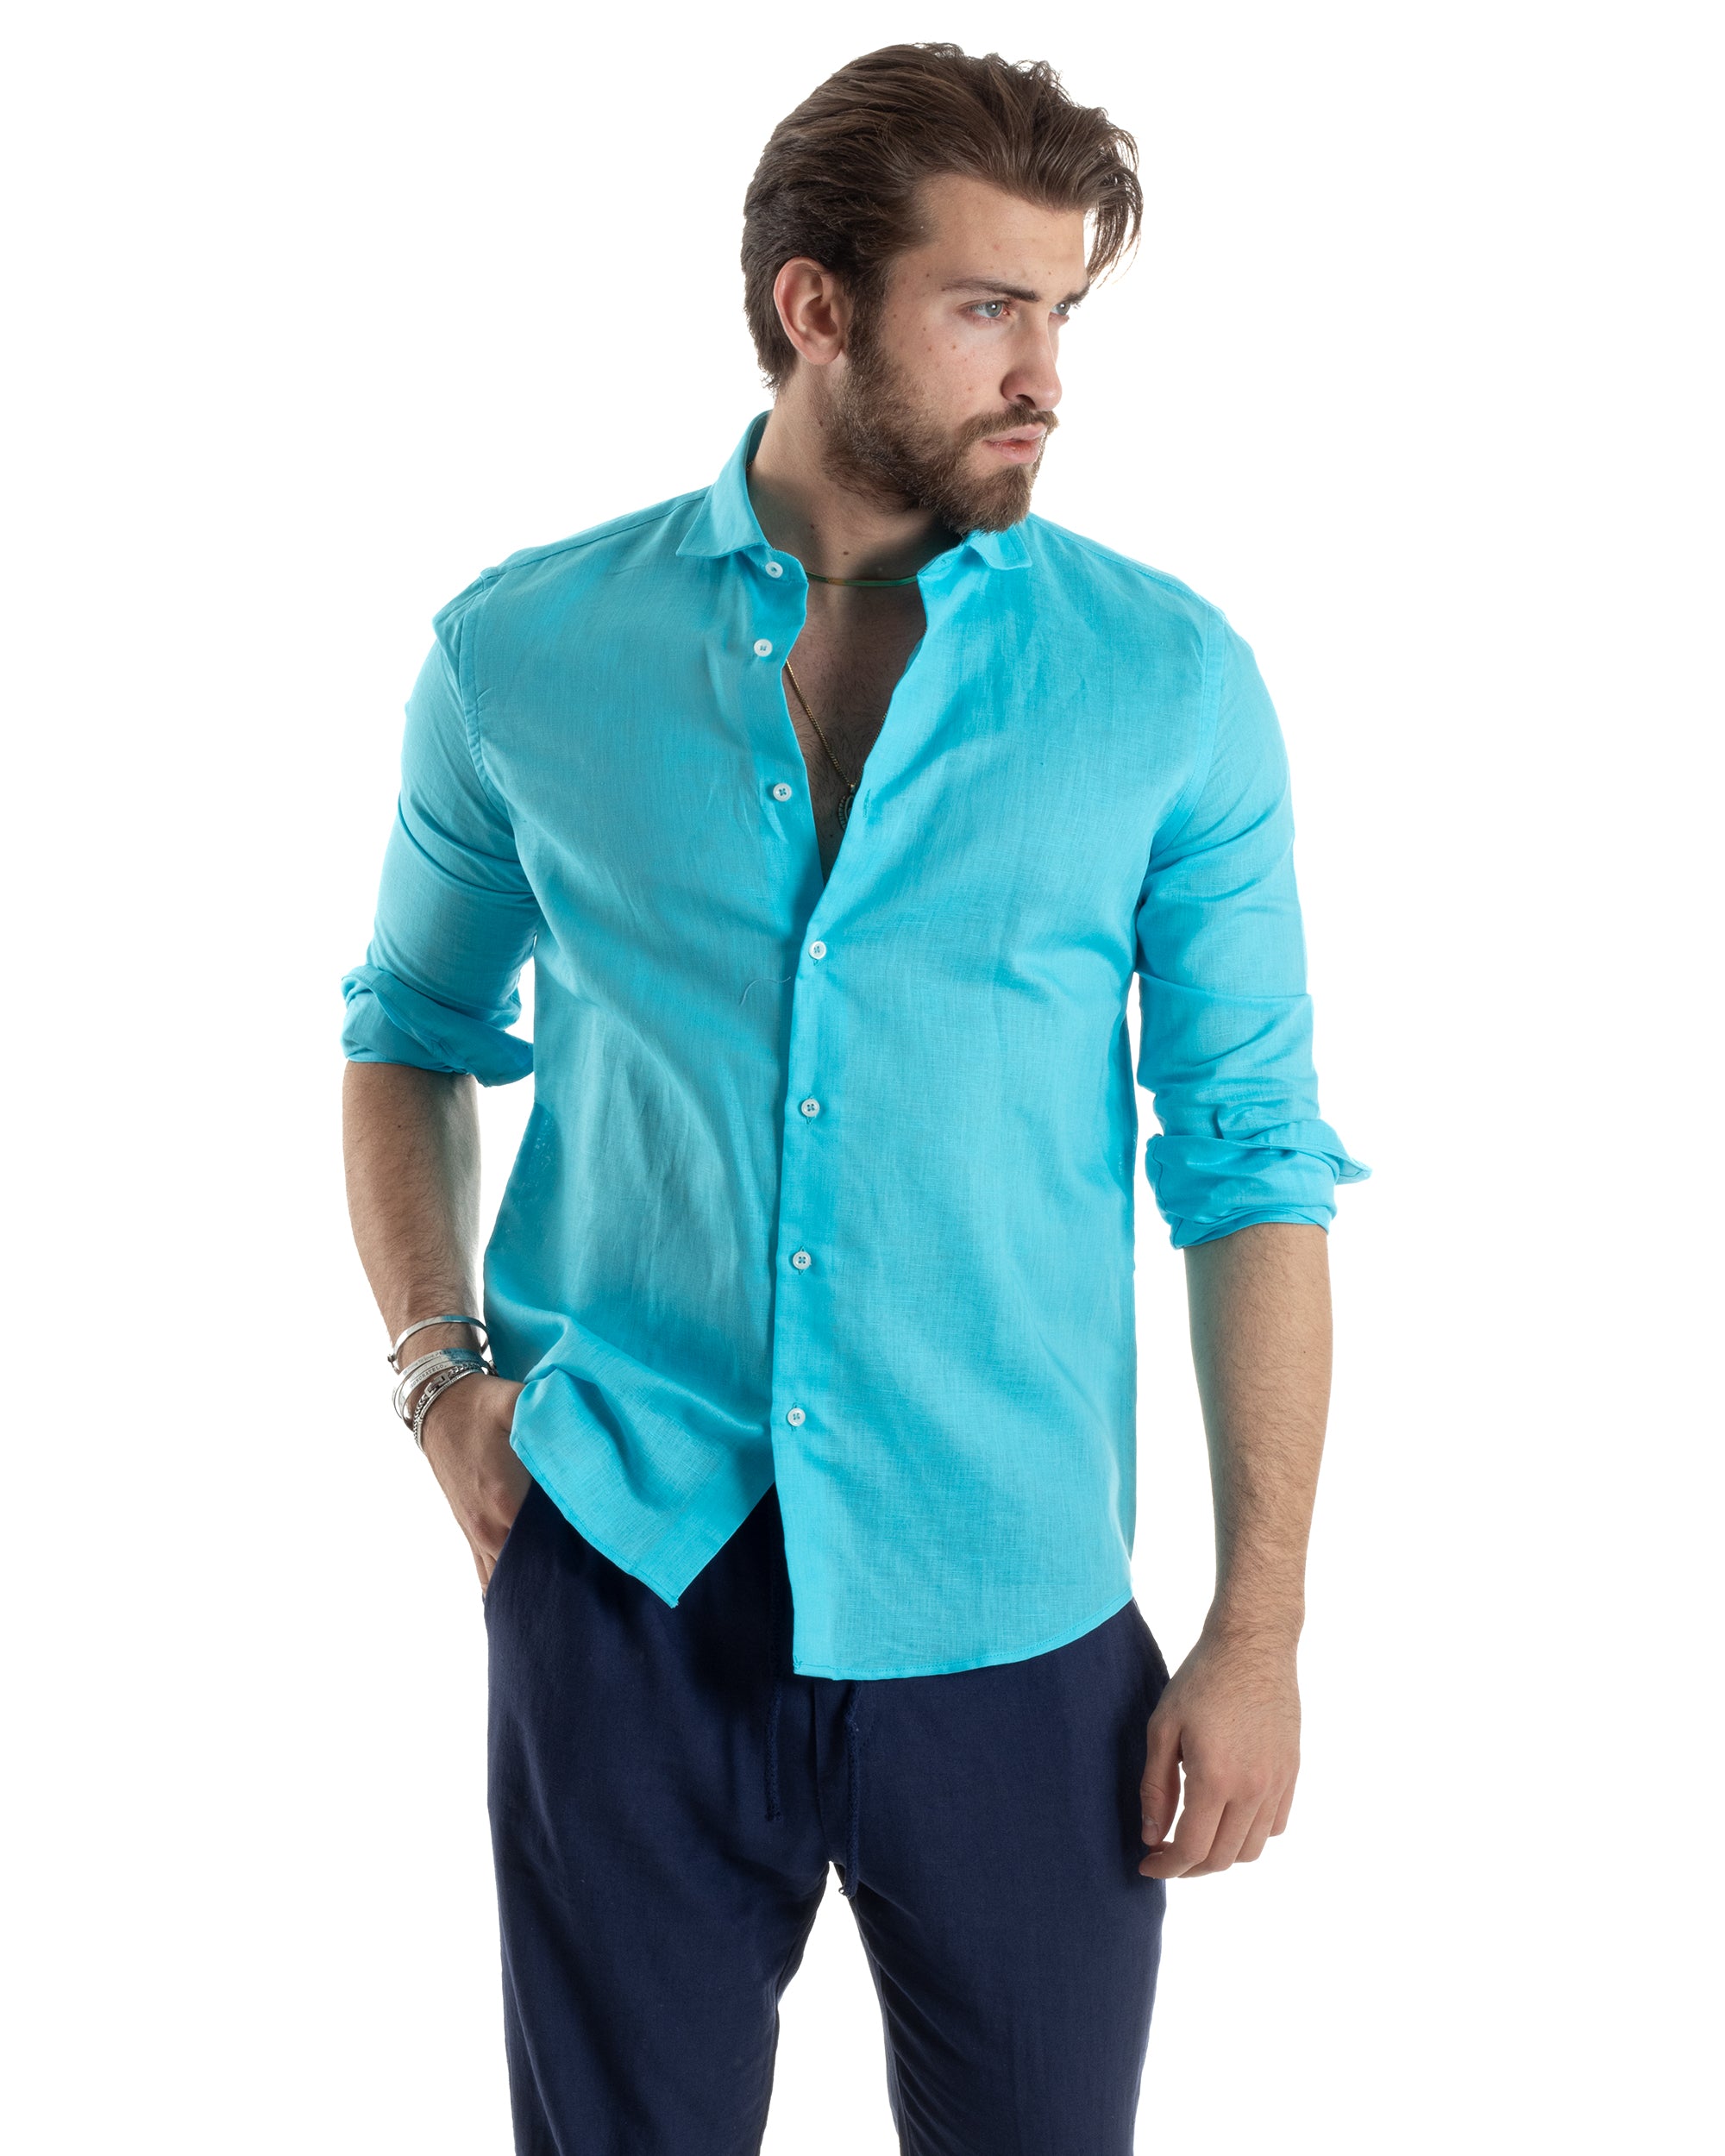 Men's Shirt With Collar Solid Color Turquoise Linen Long Sleeve Casual Tailored GIOSAL-C2726A